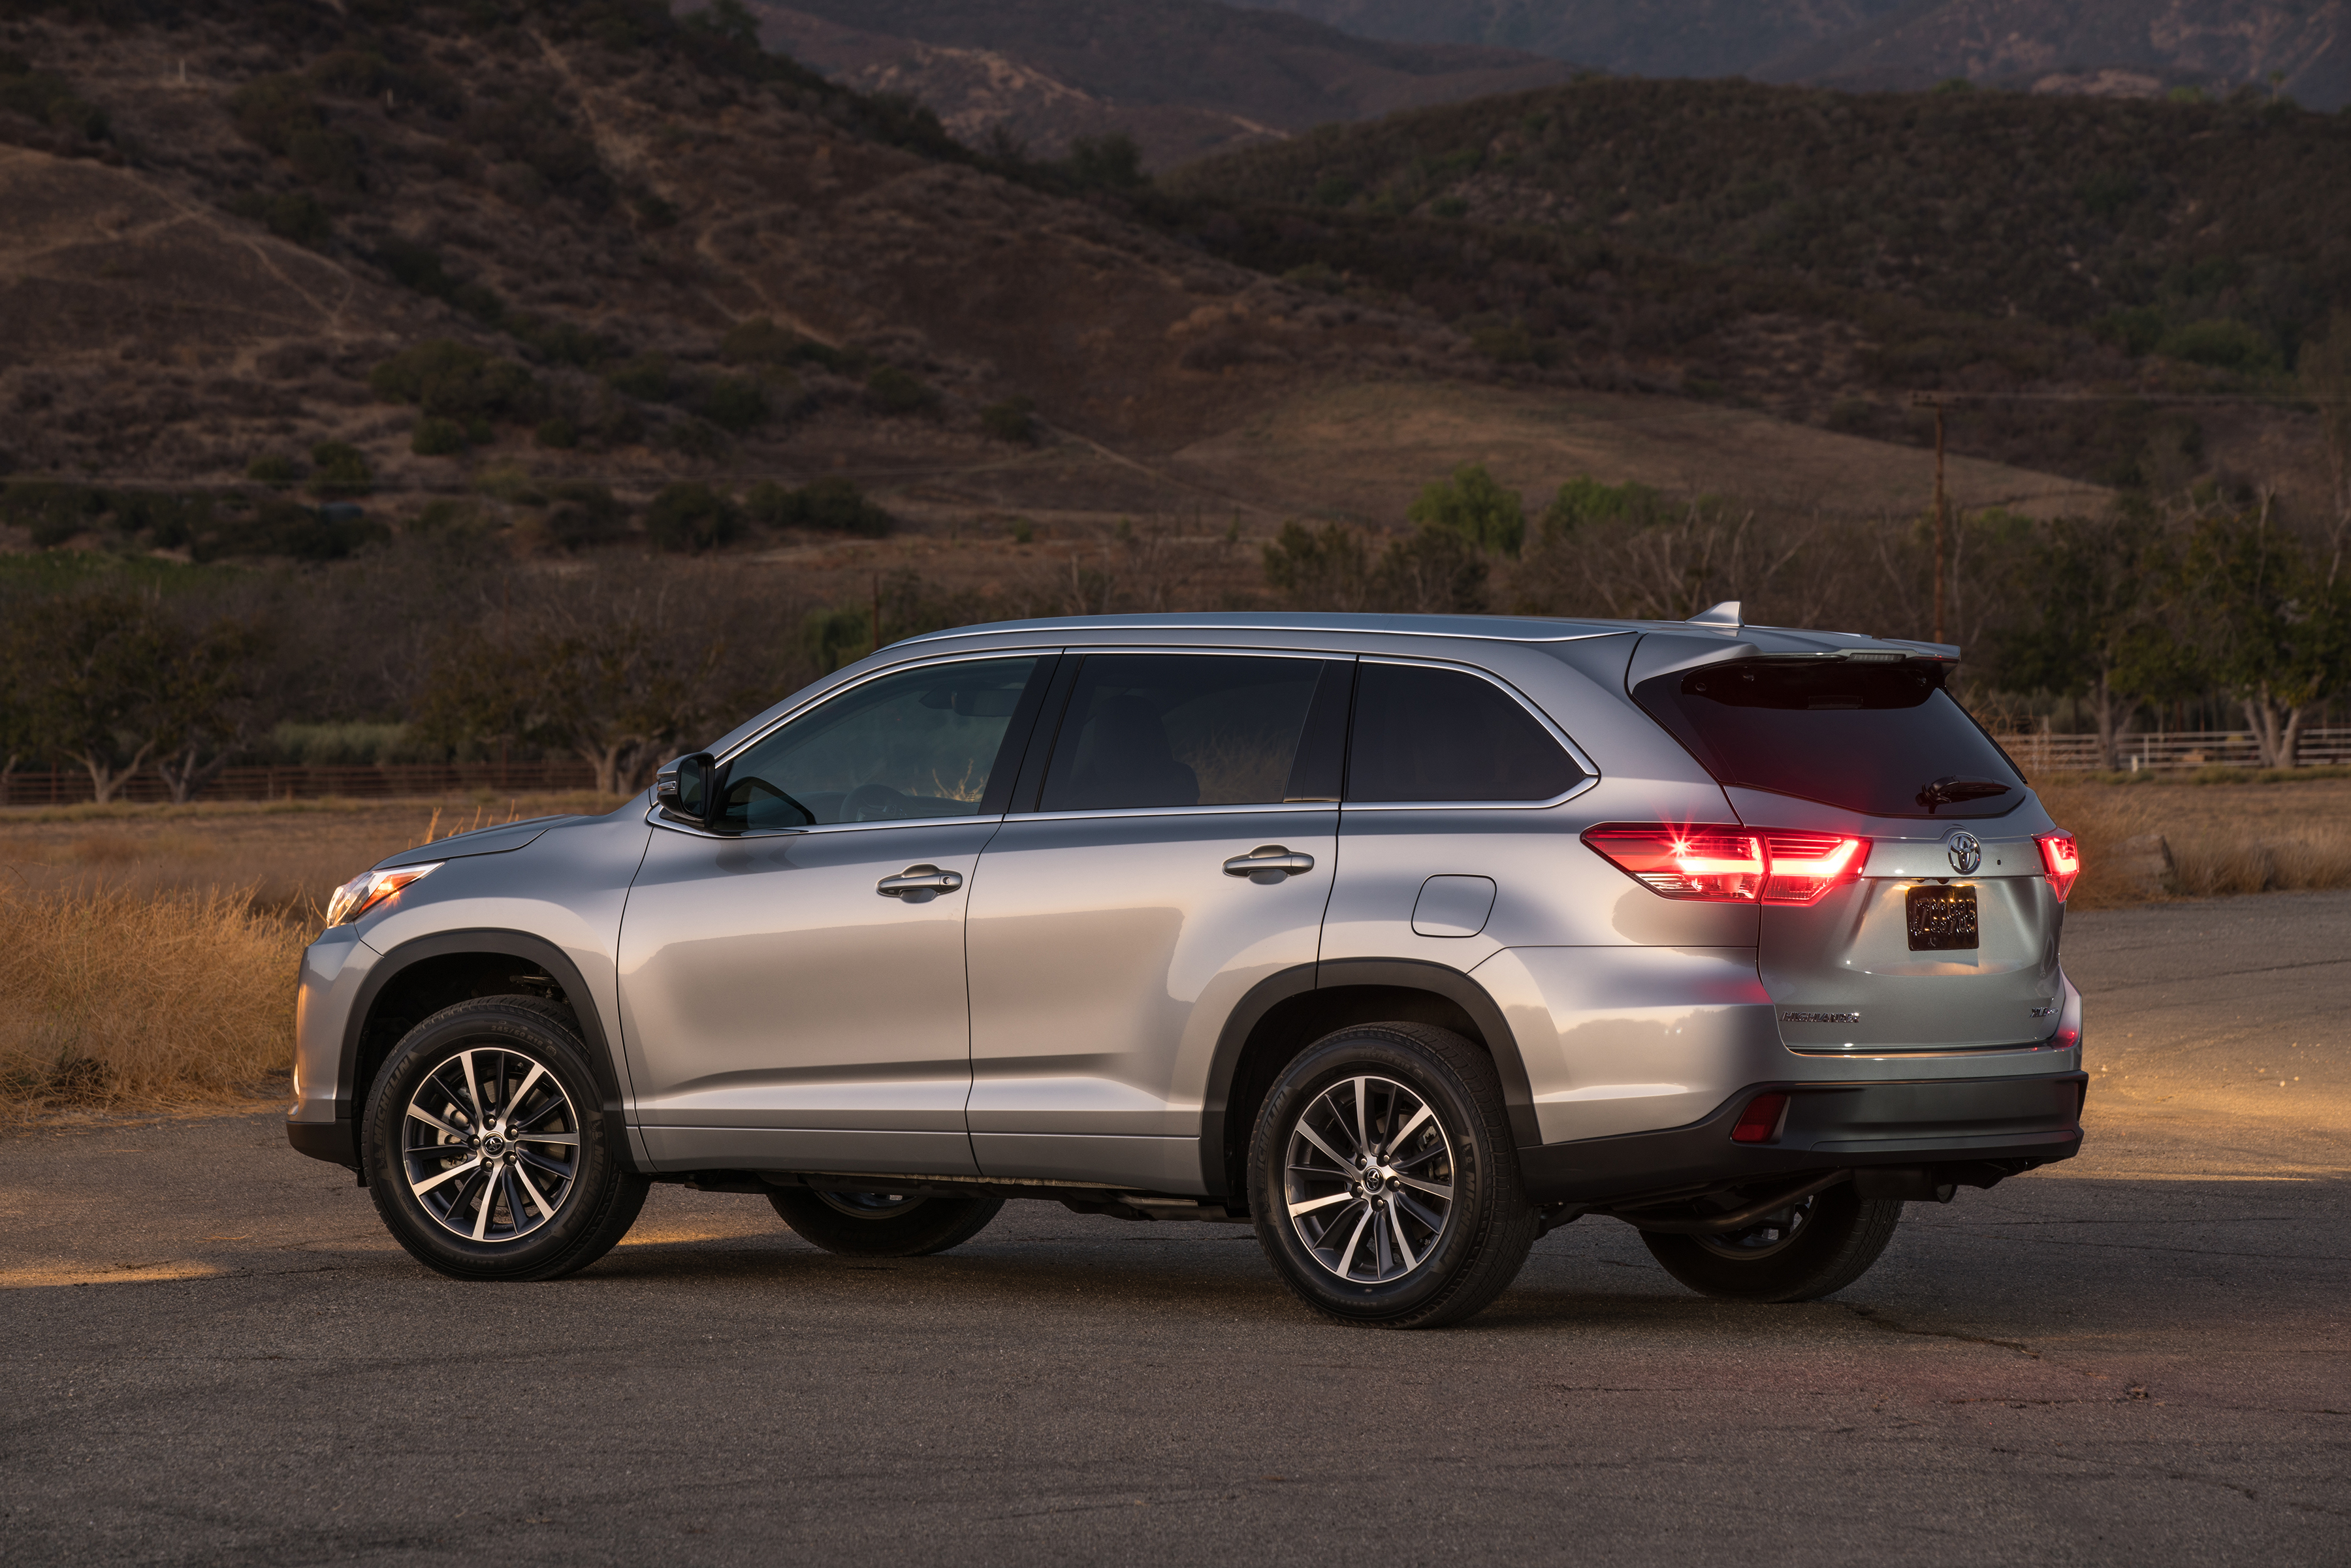 Let's play a guessing game. The 2018 Toyota Highlander: What Road Trips Were Meant To